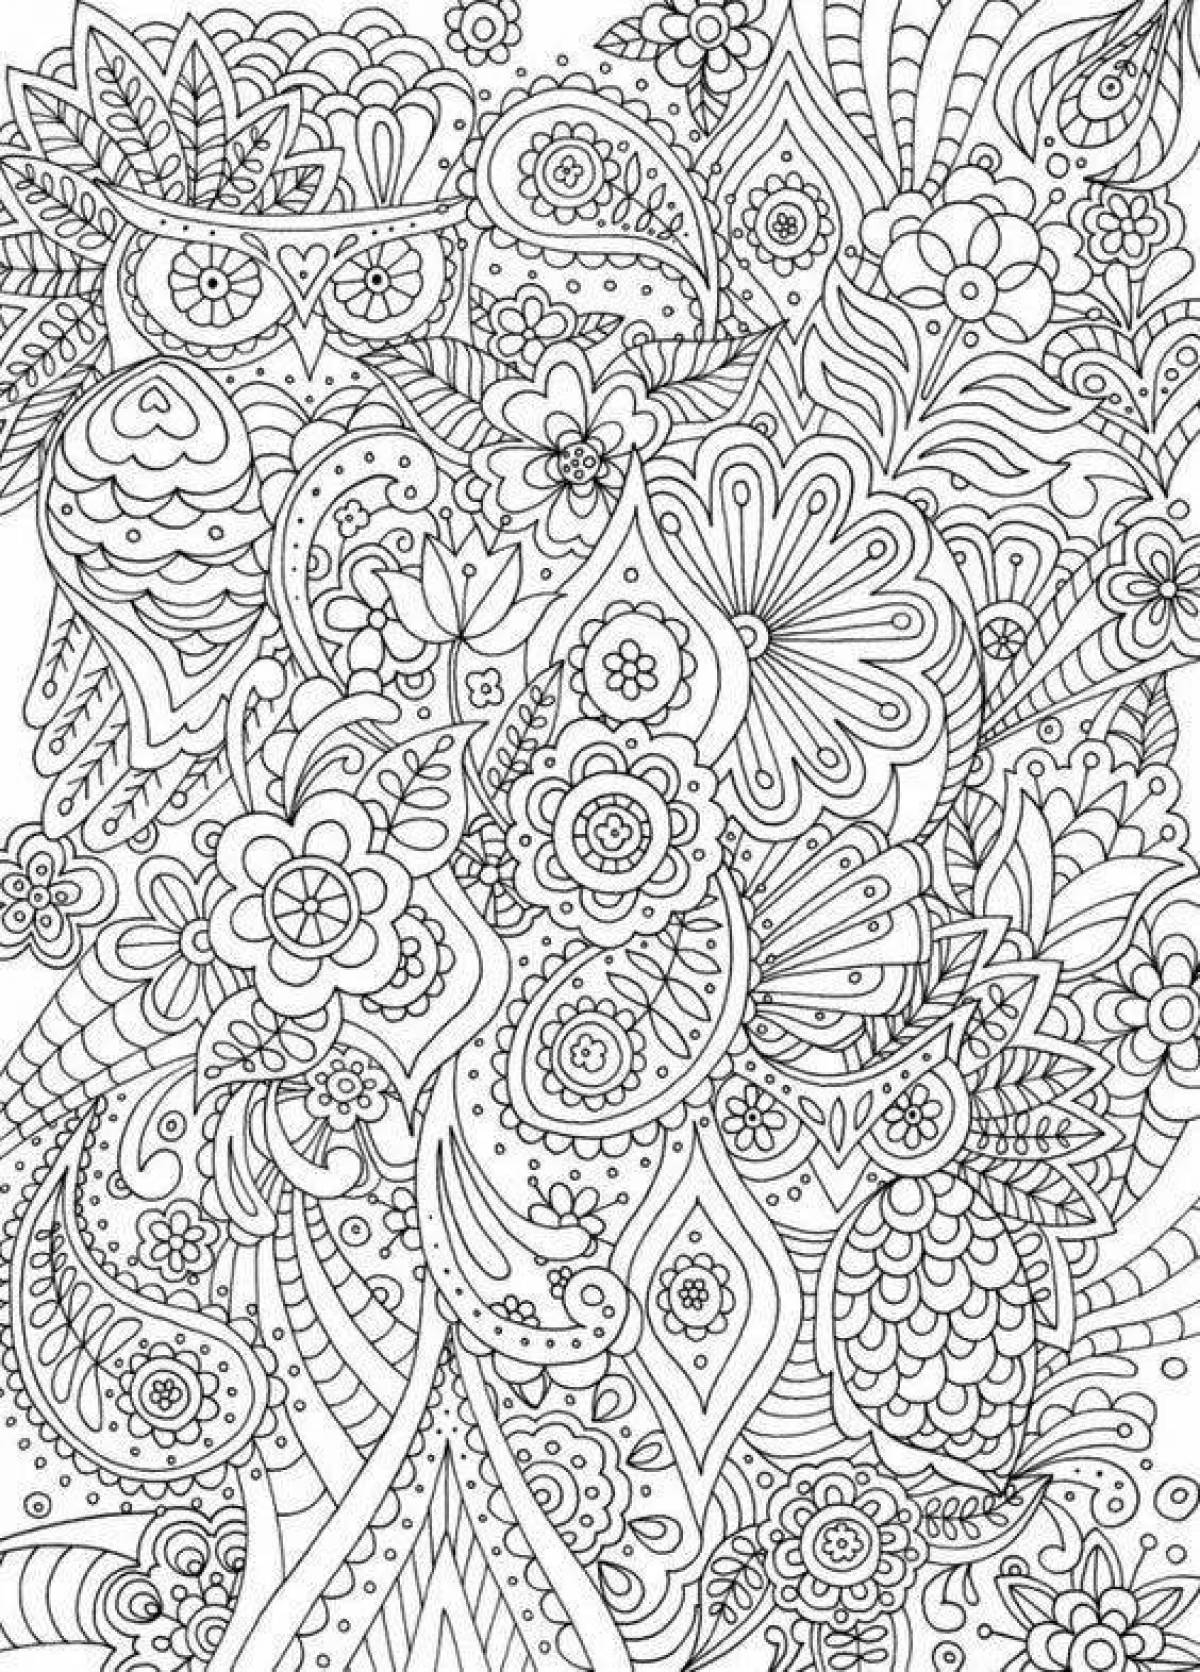 Coloring page intricate patterns - tempting